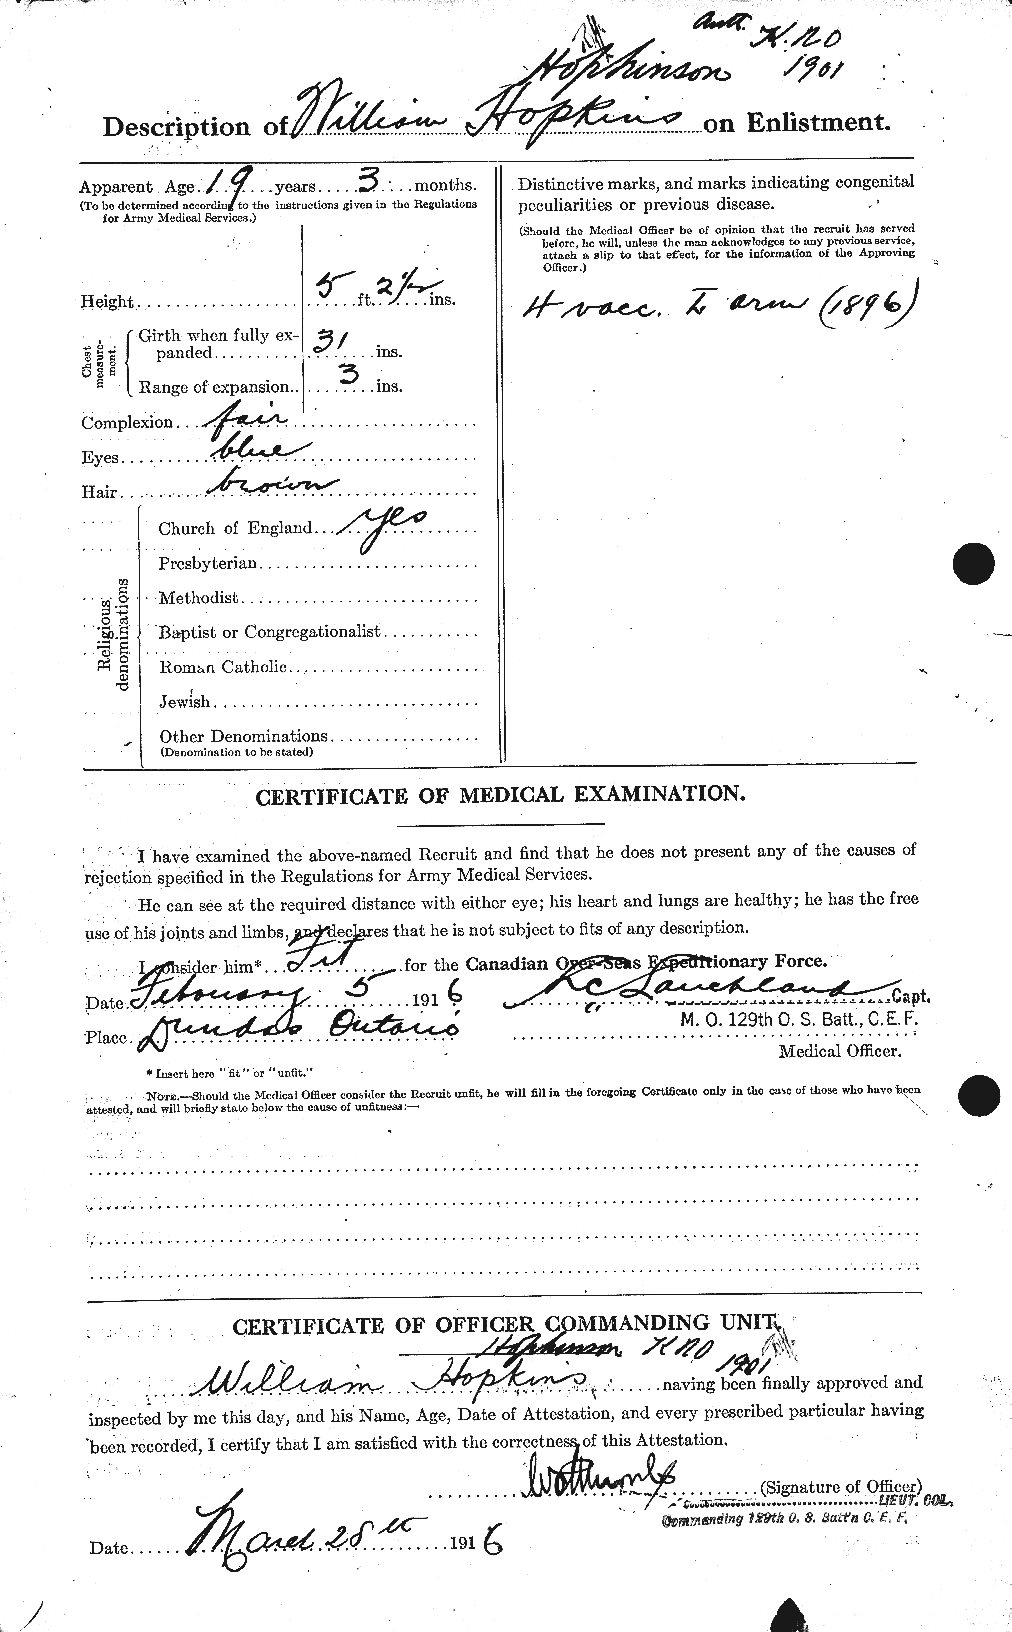 Personnel Records of the First World War - CEF 406262b